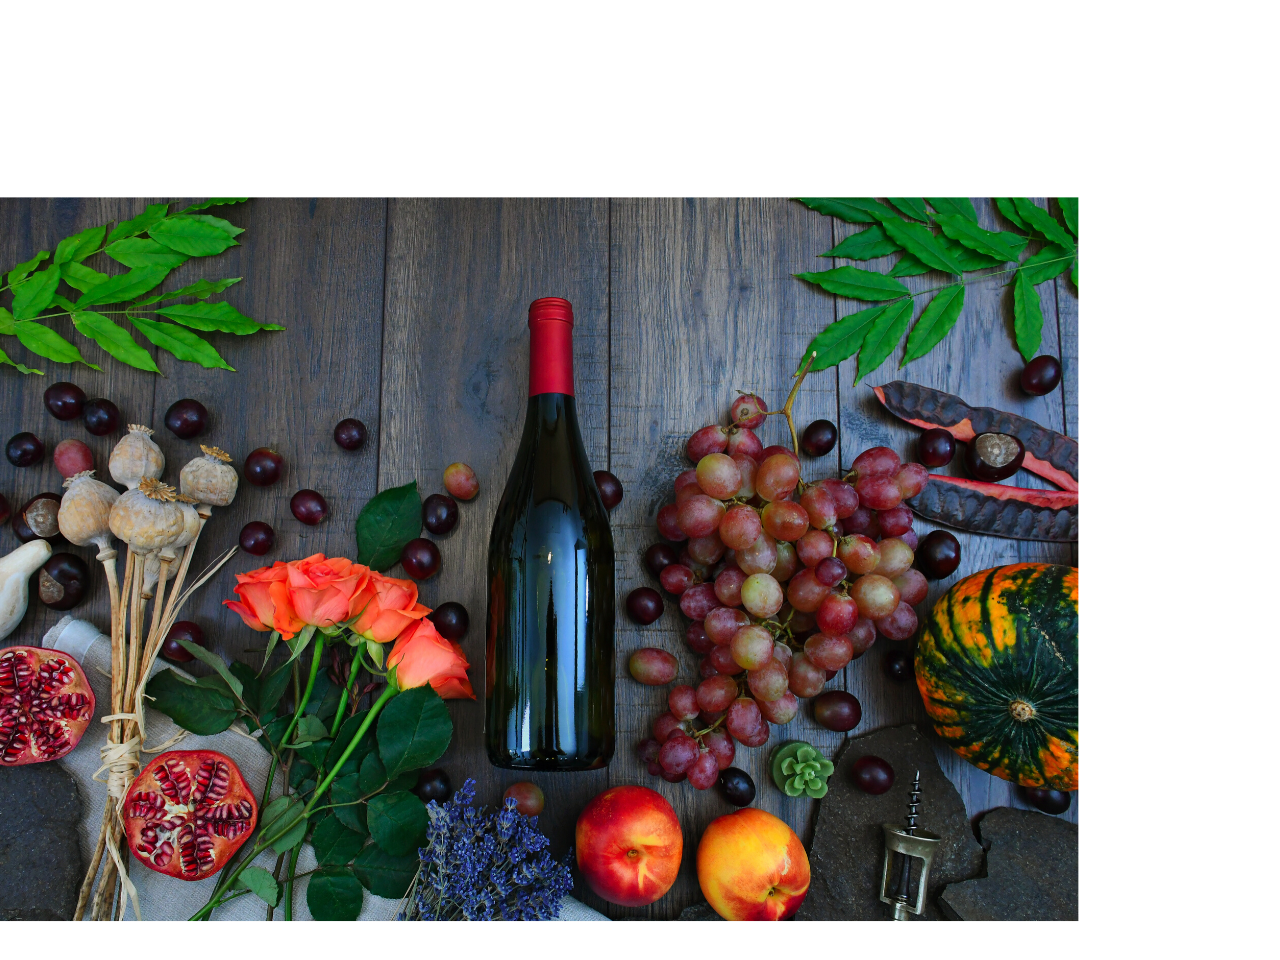 Let's 'Taste' Portugal - A Virtual Wine Bar event with Lits for charity